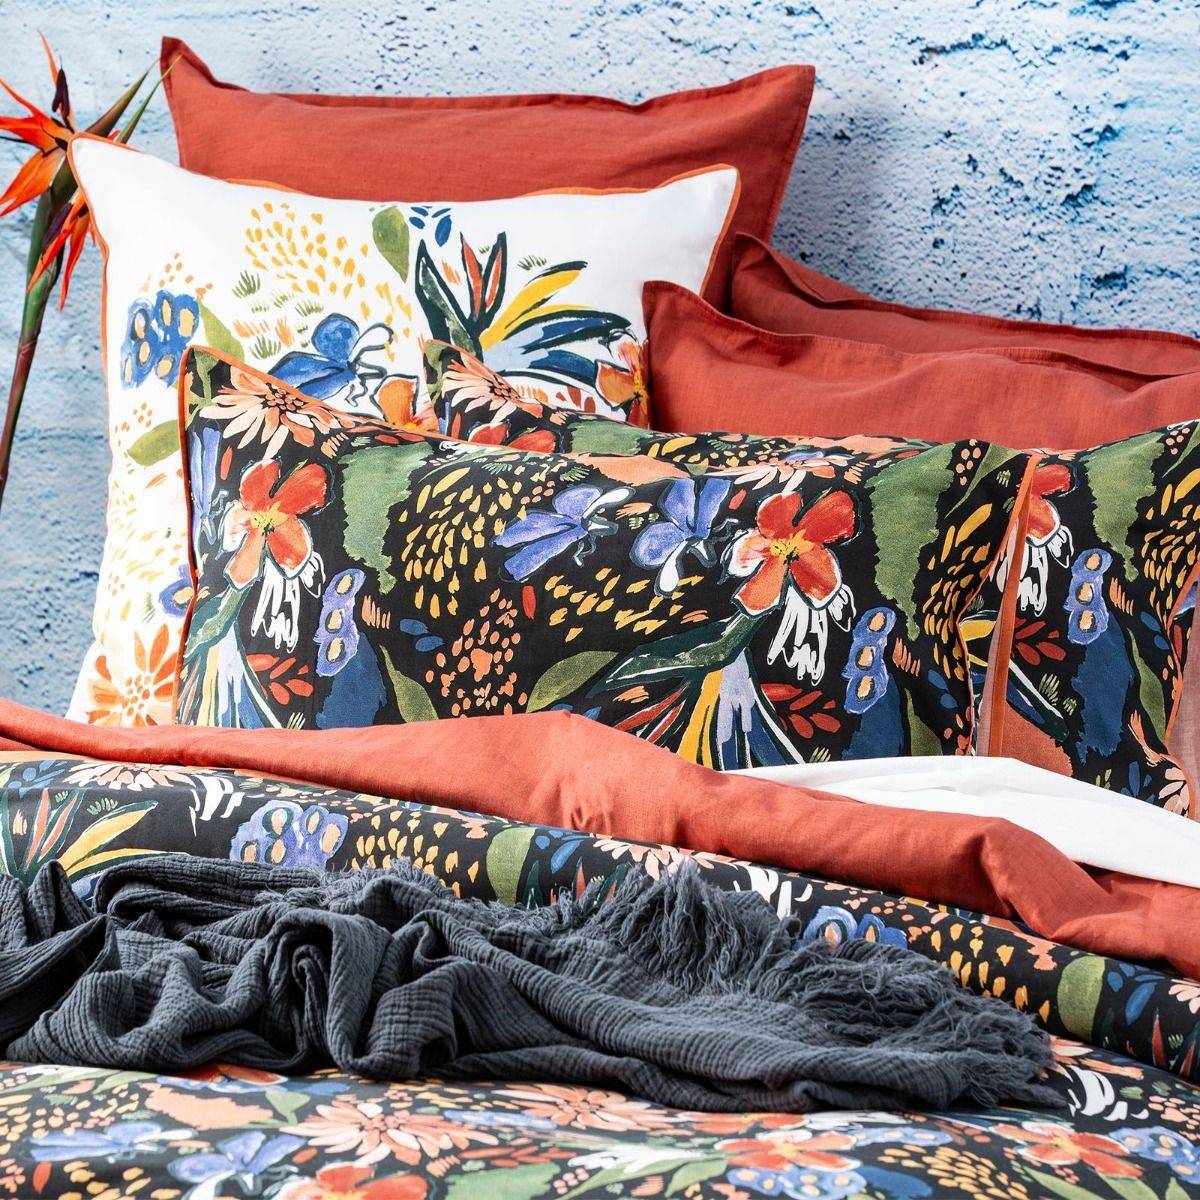 Tropical Quilt cover Set by Renee Taylor